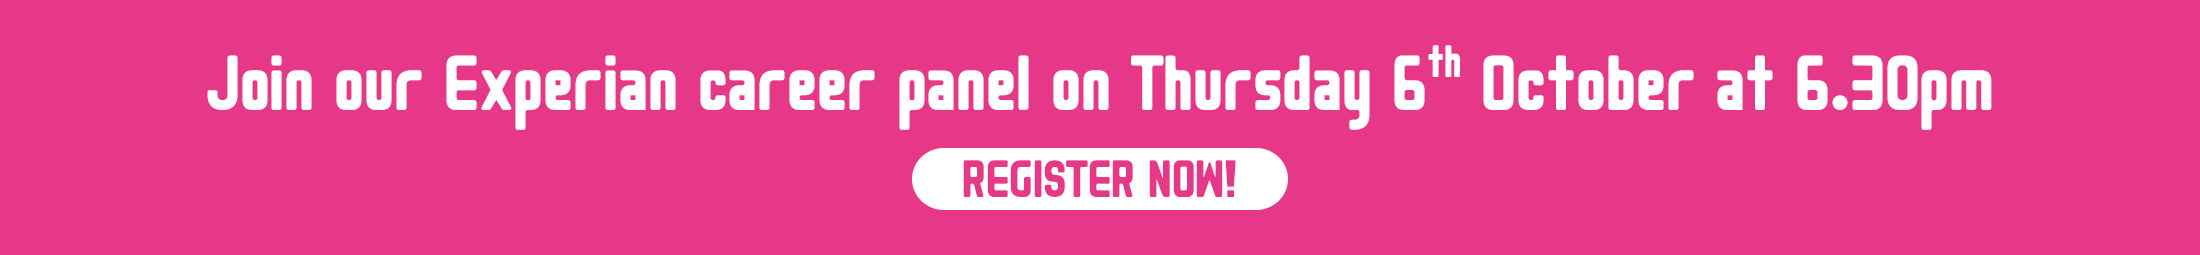 Register for our Experian career panel